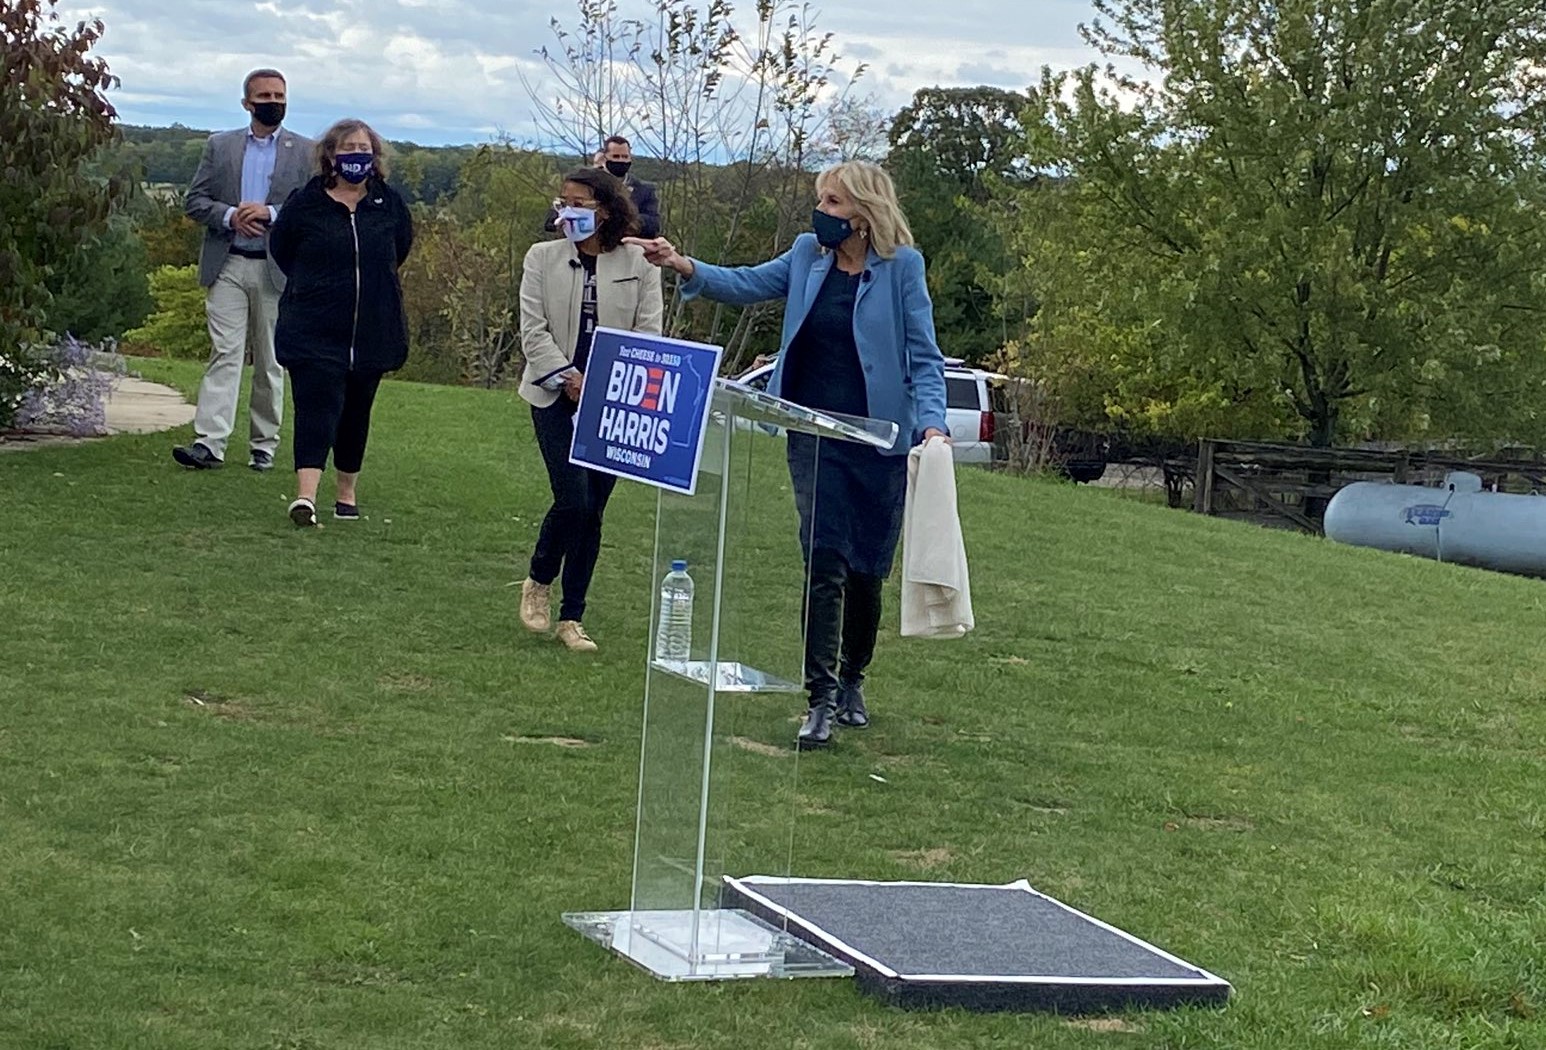 Former Second Lady Jill Biden made a stop in Eagle, Wisconsin, on Monday, Sept. 28